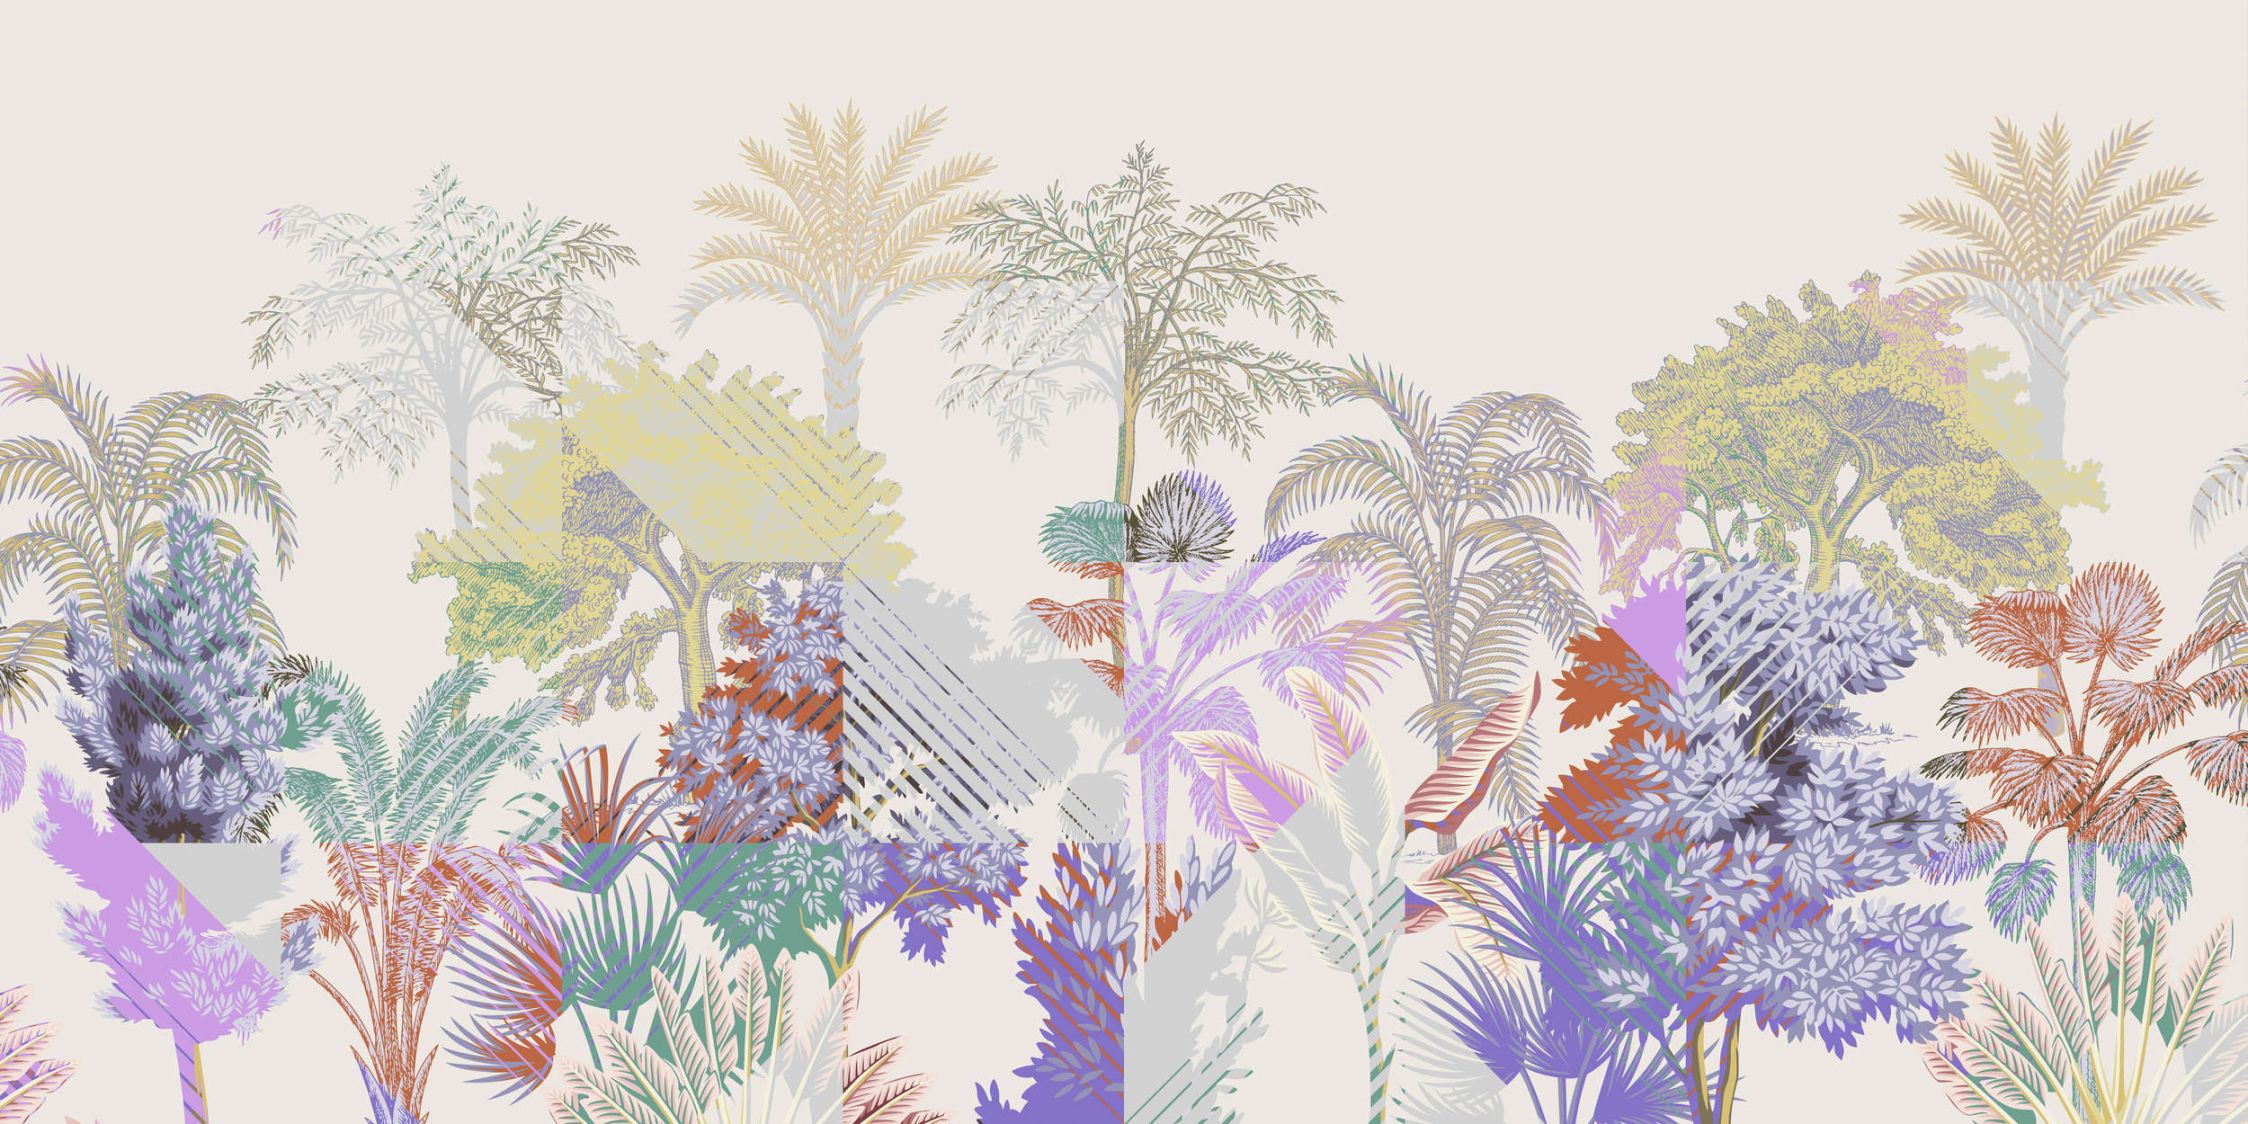             Photo wallpaper »esplanade 2« - jungle patchwork with bushes - colourful | Smooth, slightly pearly shimmering non-woven fabric
        